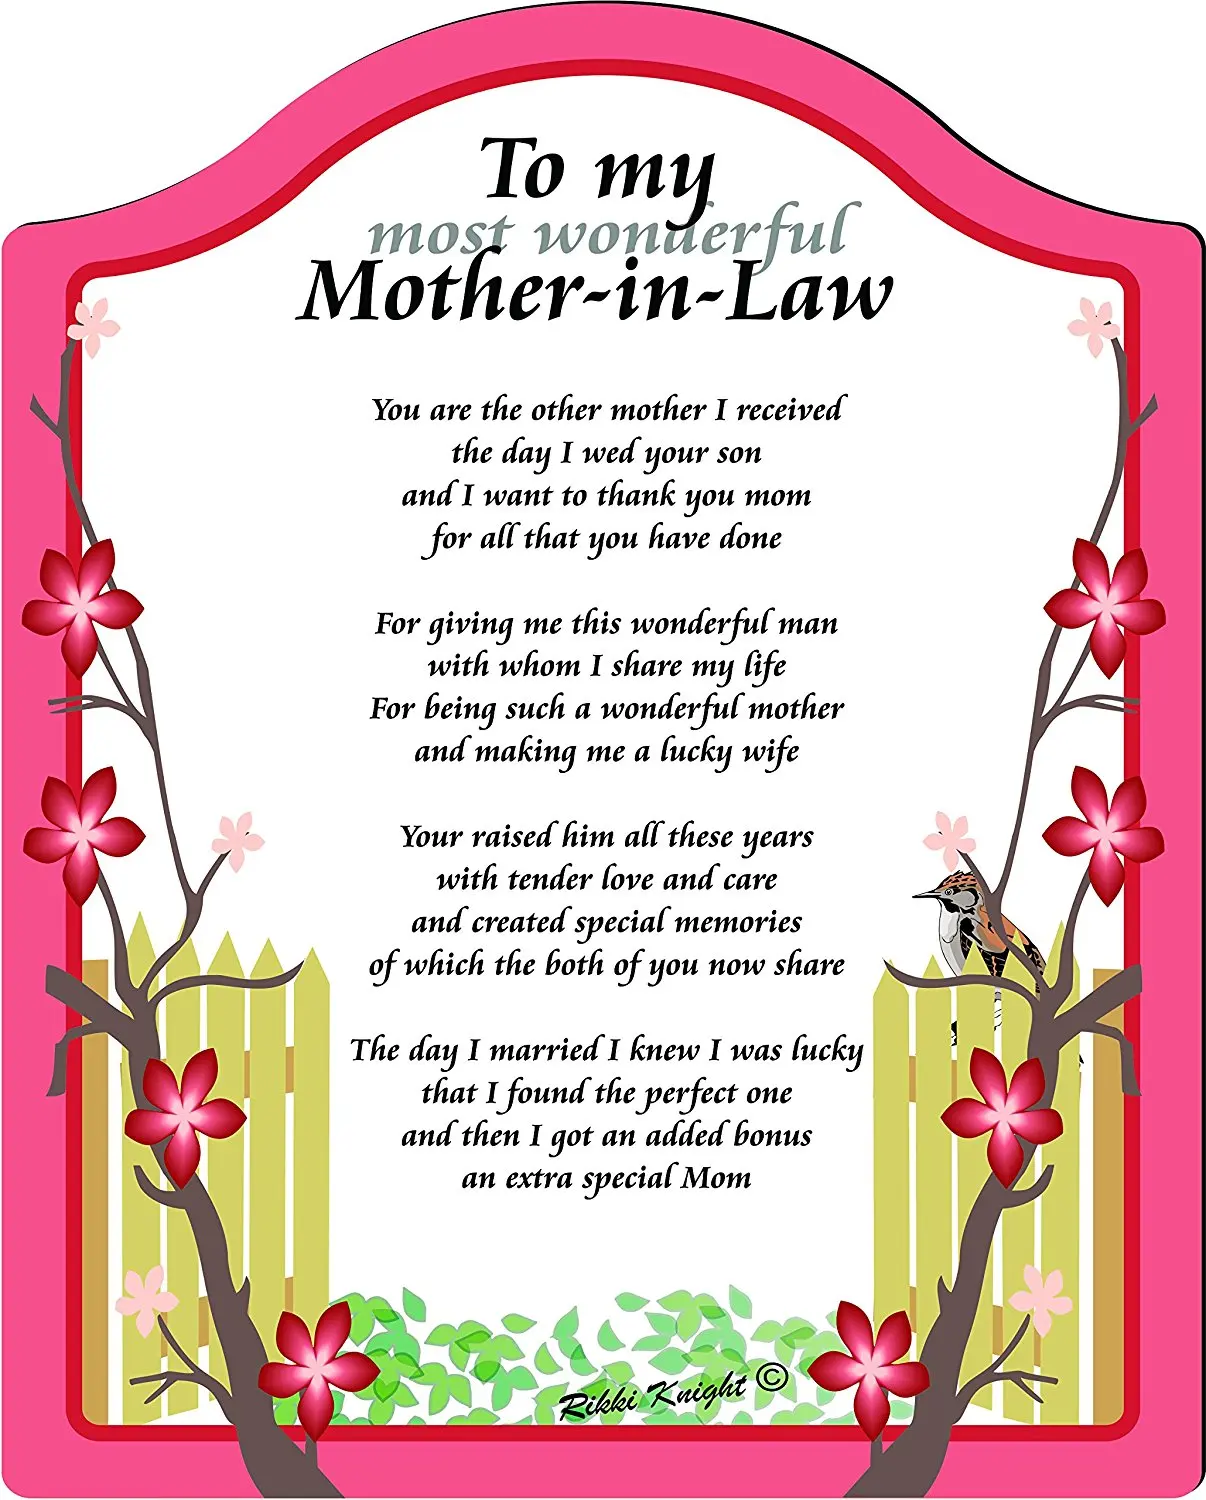 Personalized Poem For Mother In Law Thoughtful T For Any Occasion My Xxx Hot Girl